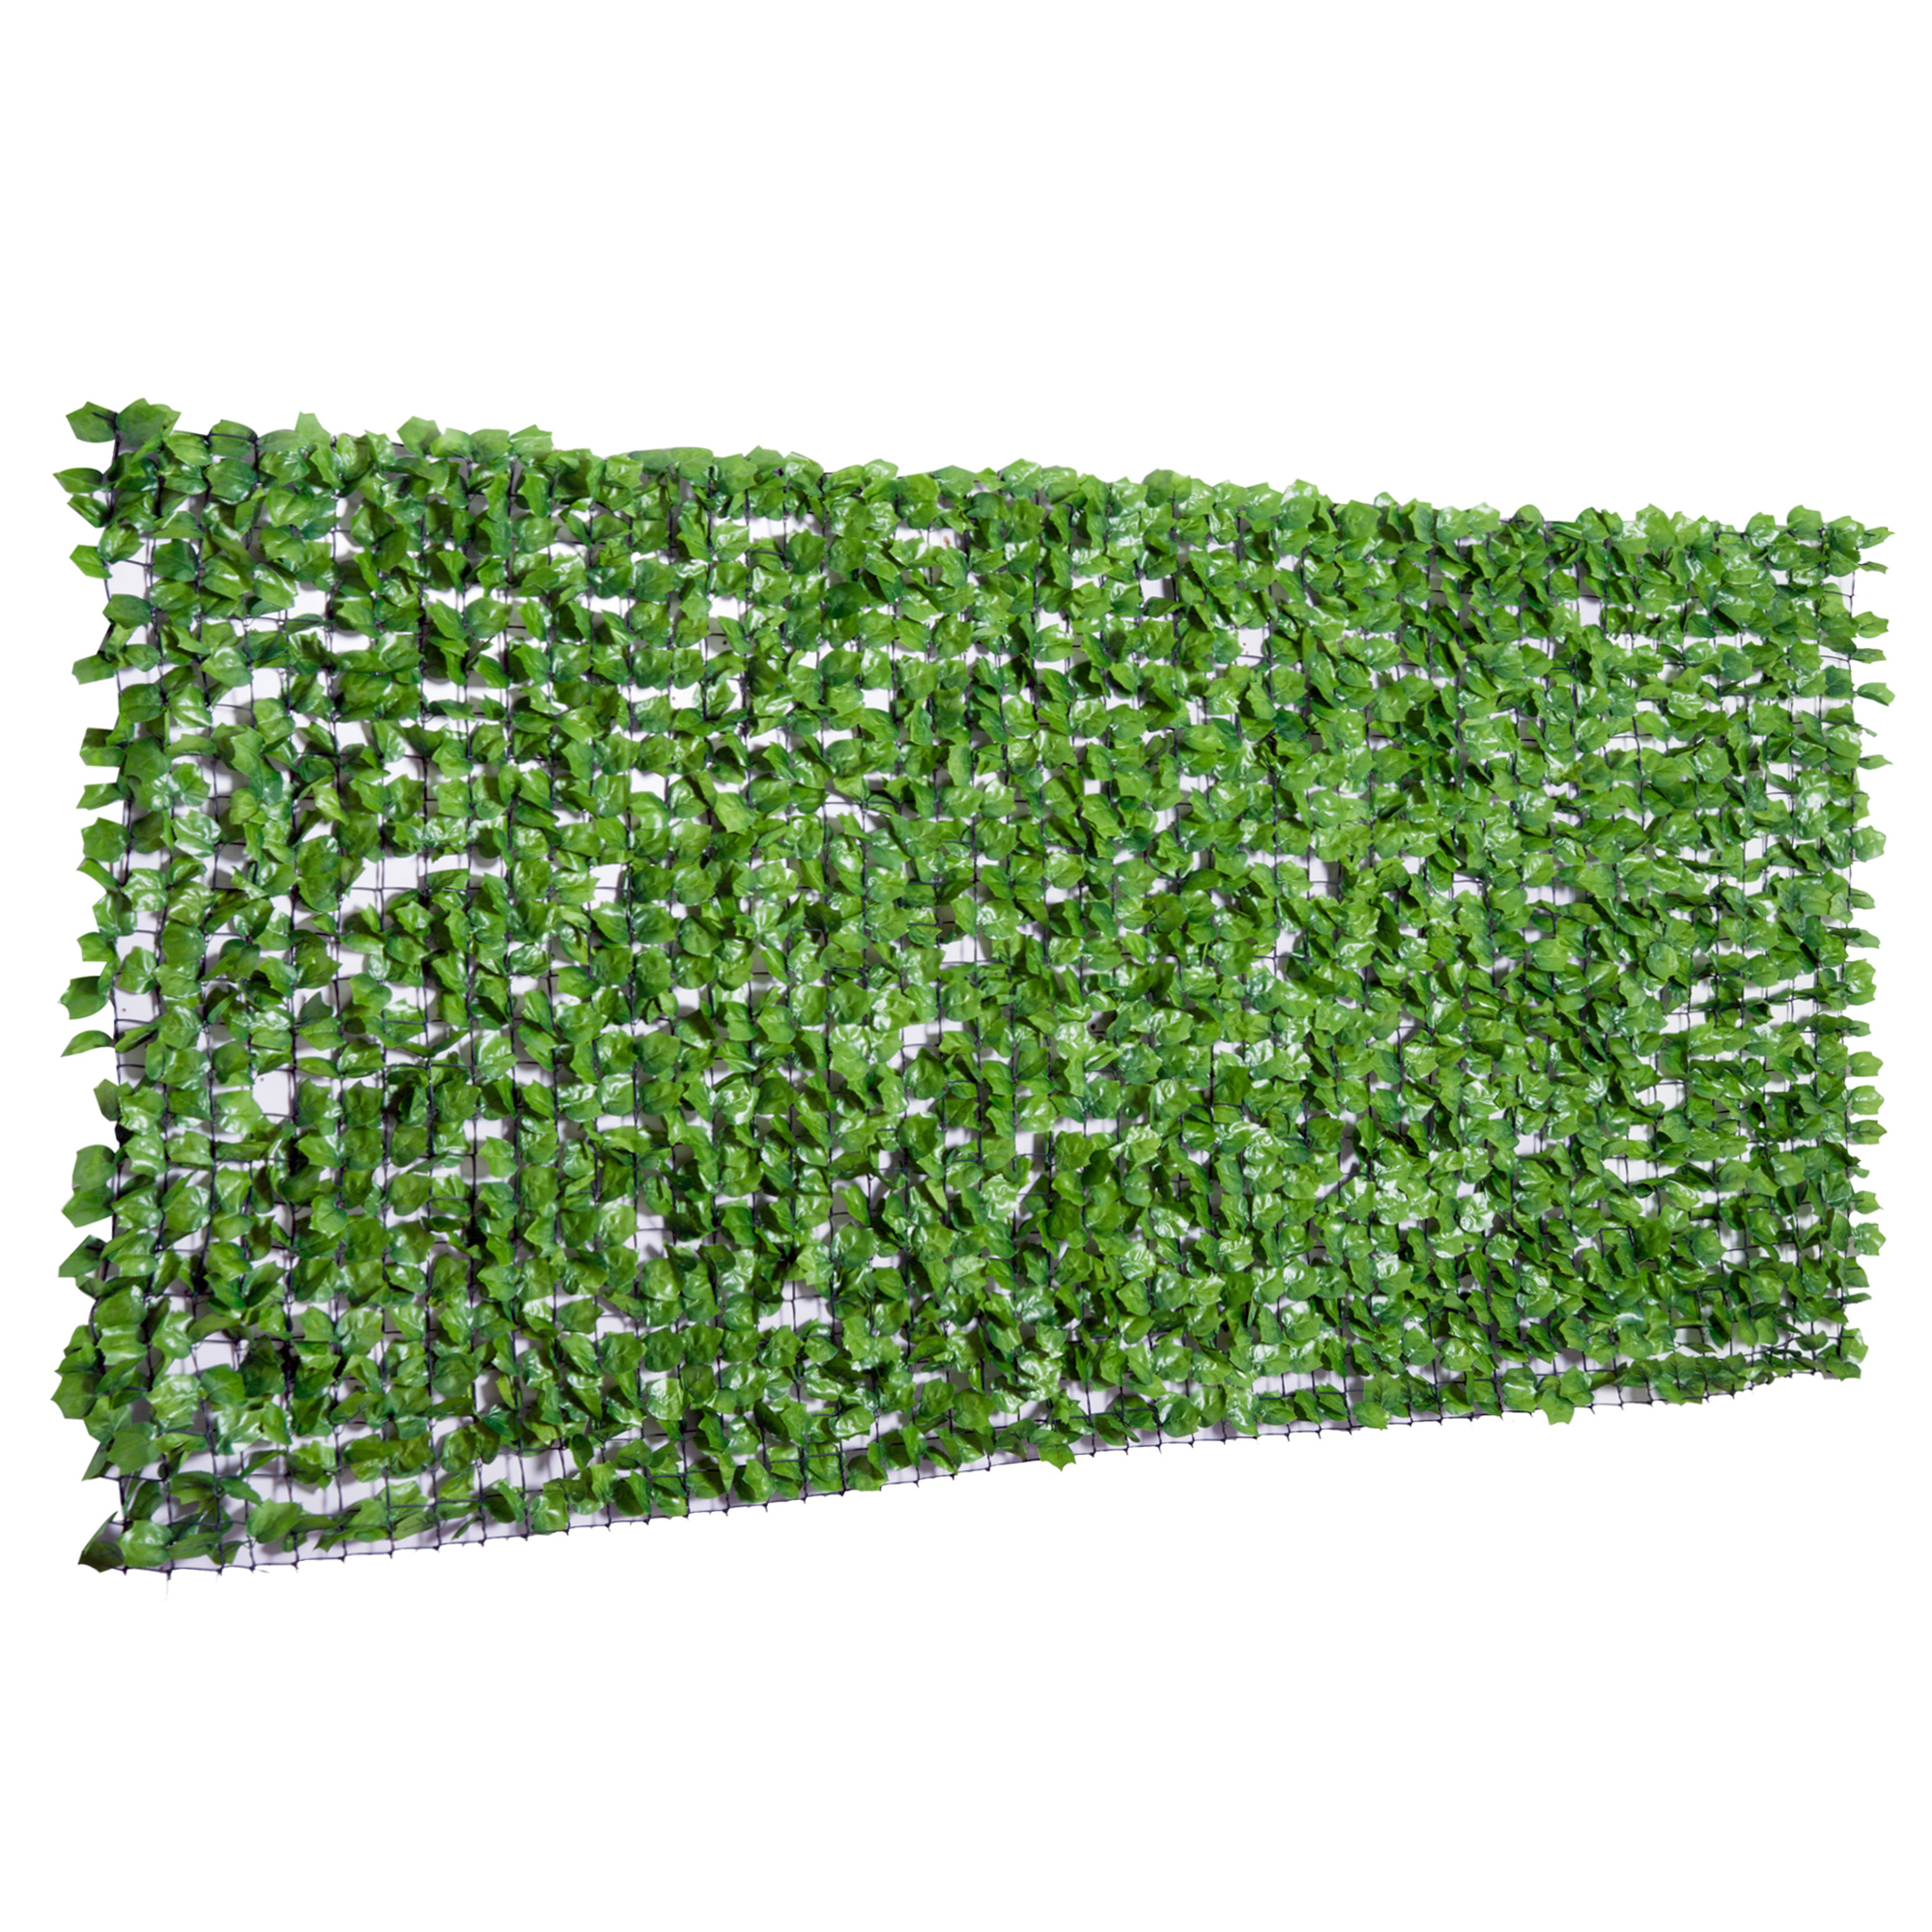 Outsunny Roll of Artificial Hedge για Μπαλκόνι και Κήπο σε πράσινο PE 300x150cm